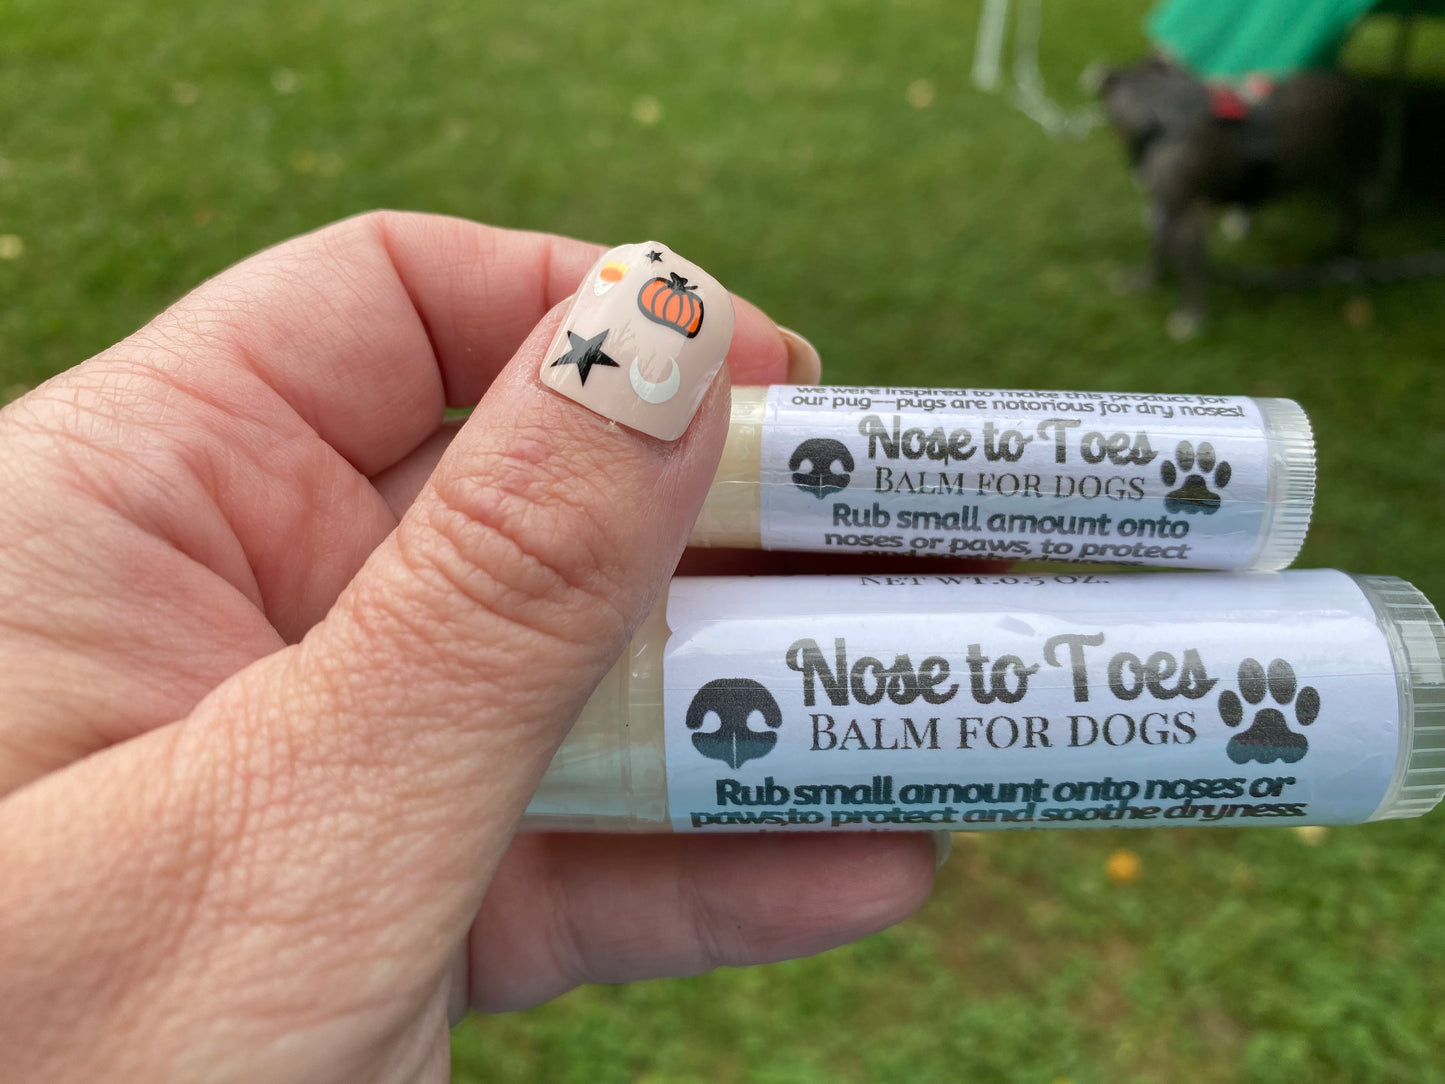 "Nose to Toes" Balm for Dogs